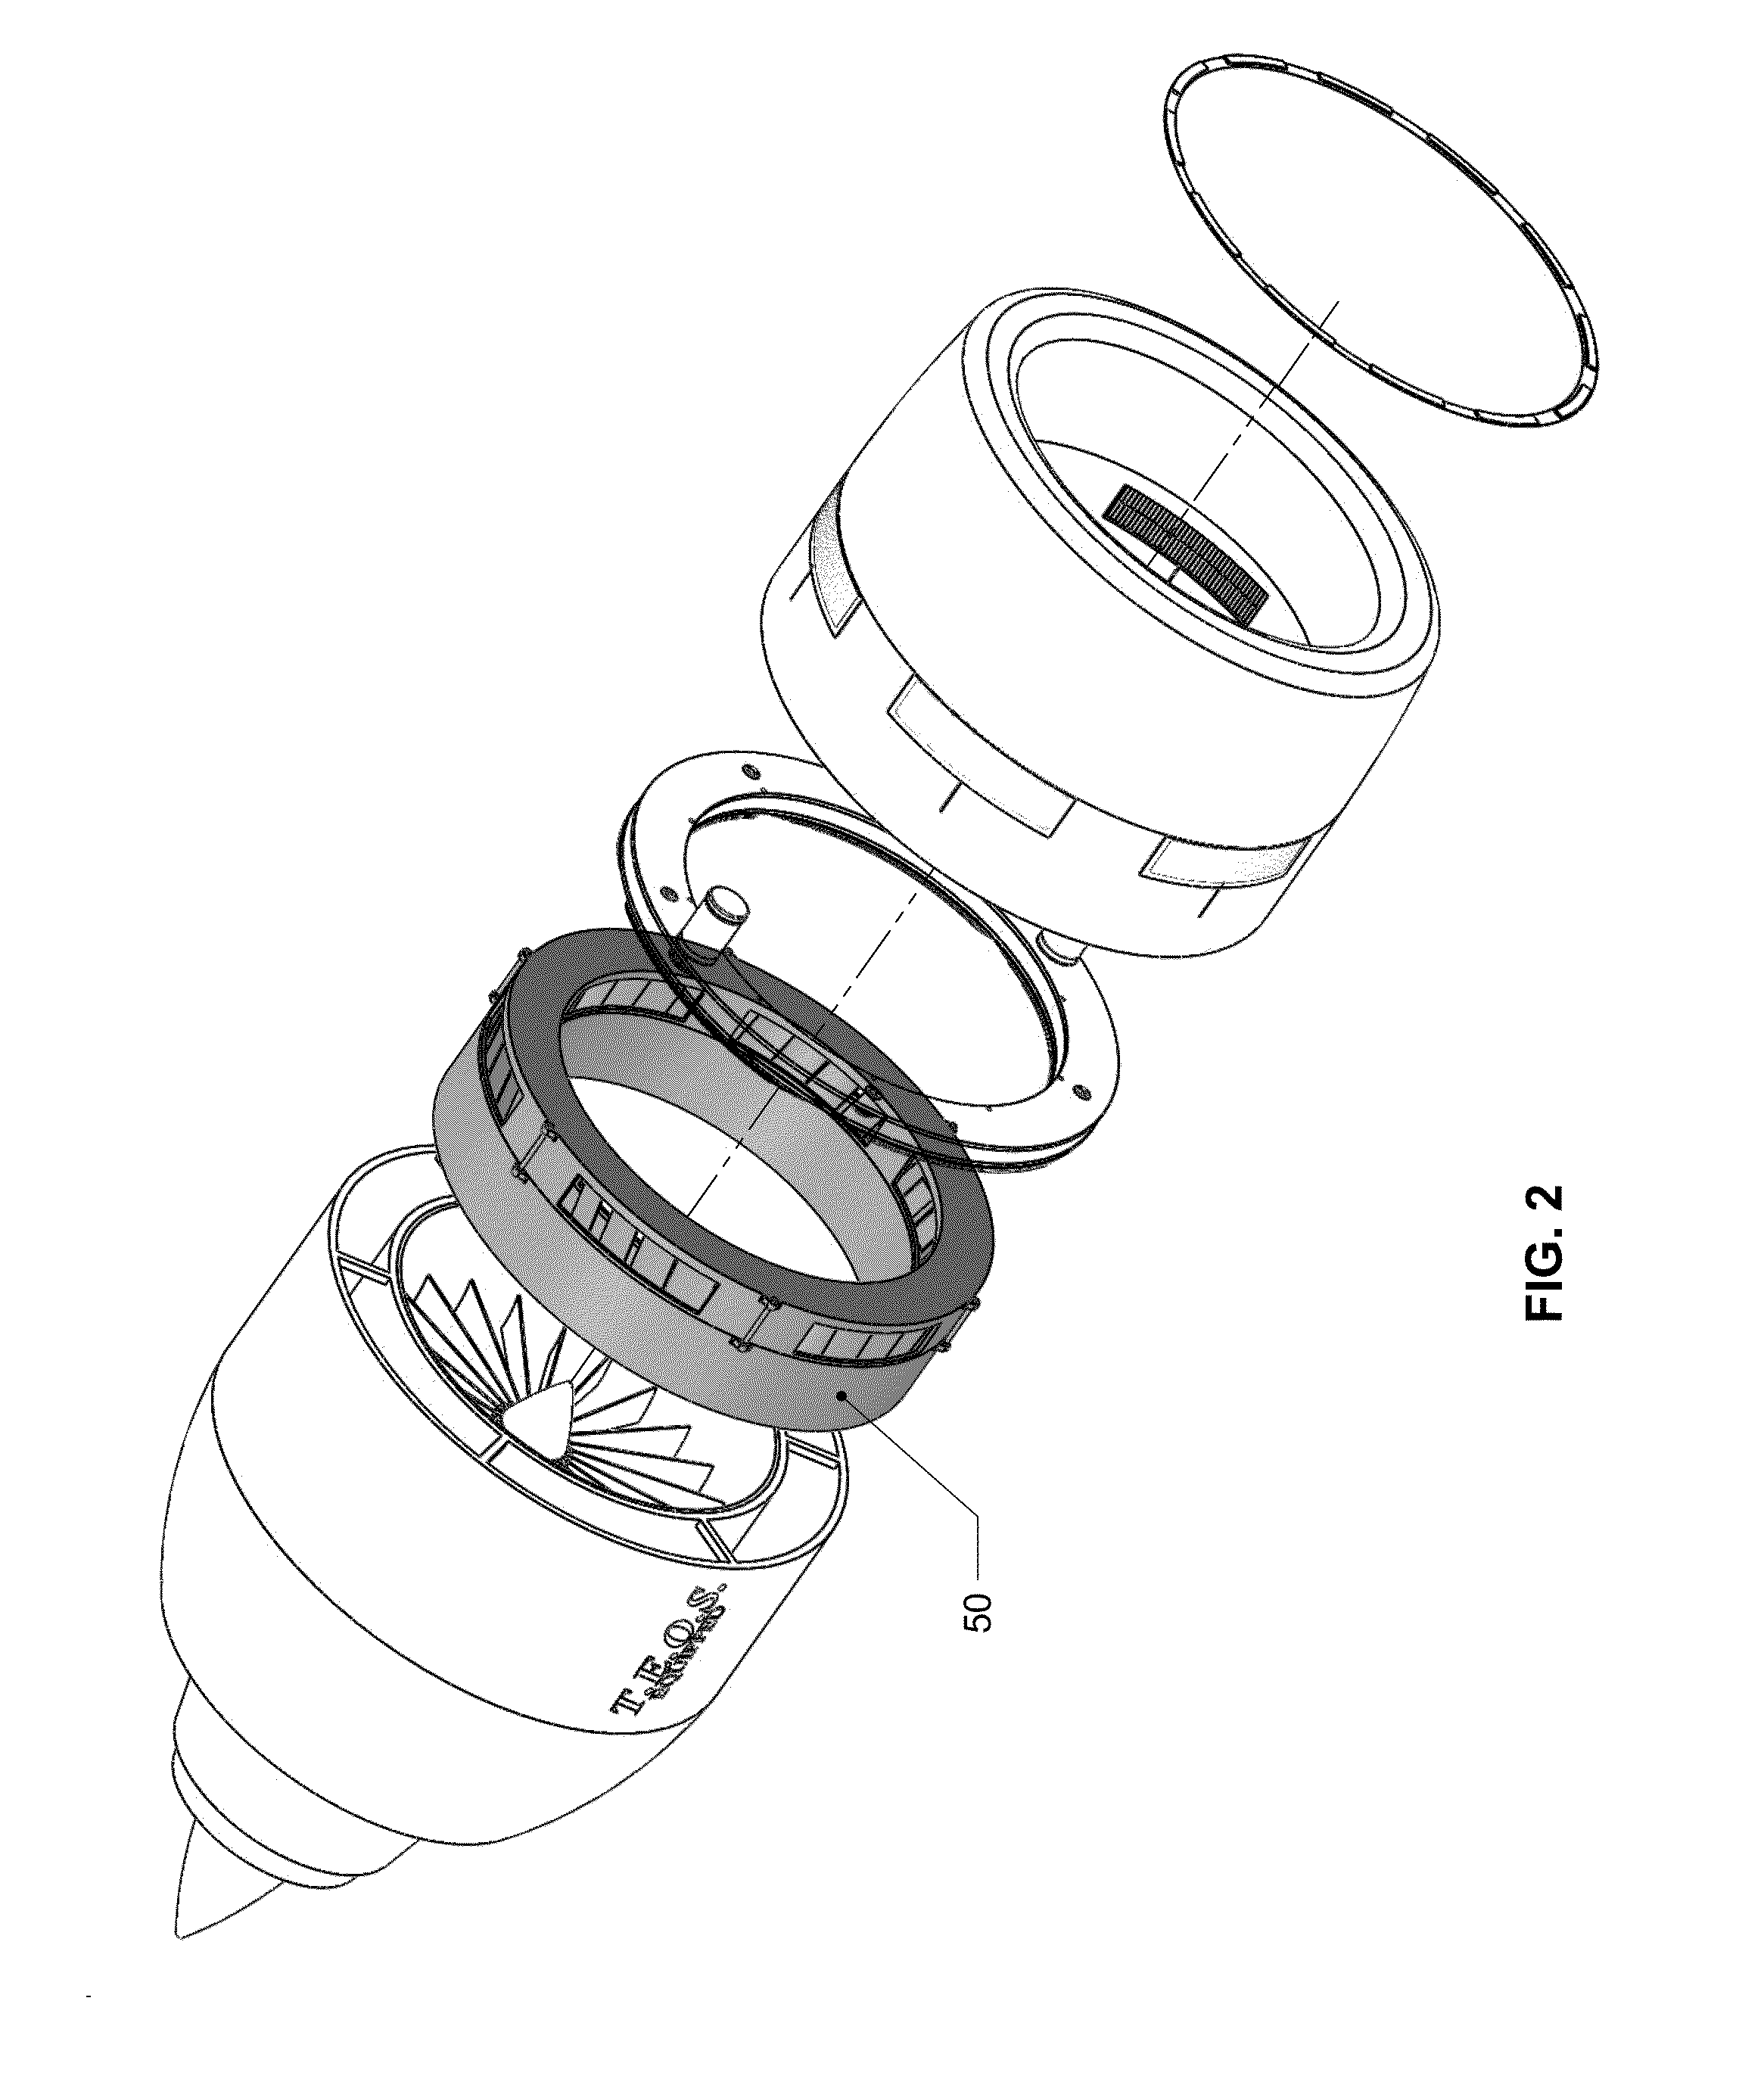 Thrust Enabling Objective System